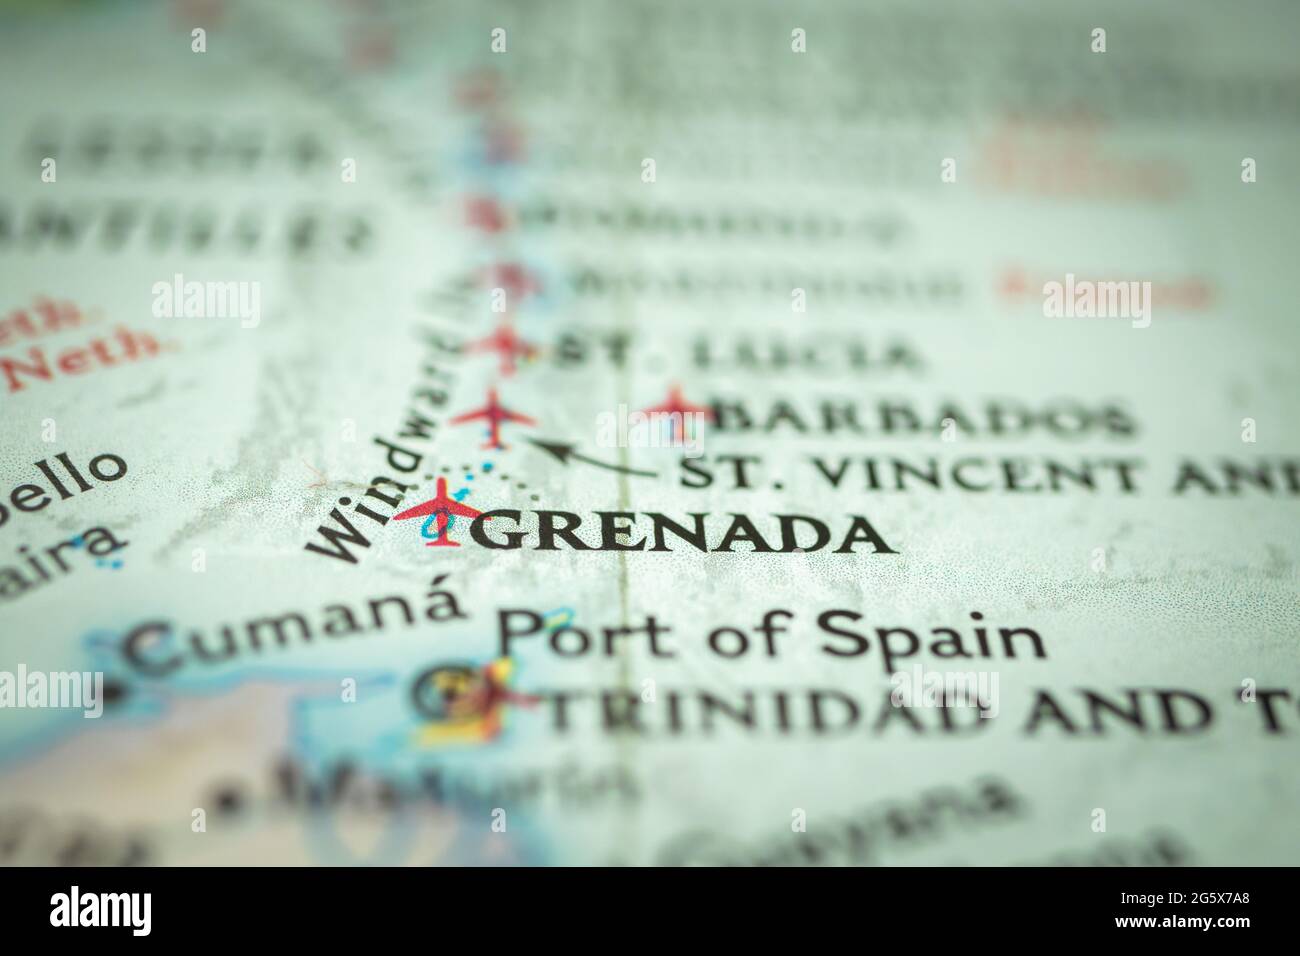 Location Grenada, marker and point closeup, tourism and trip concept, North America Stock Photo